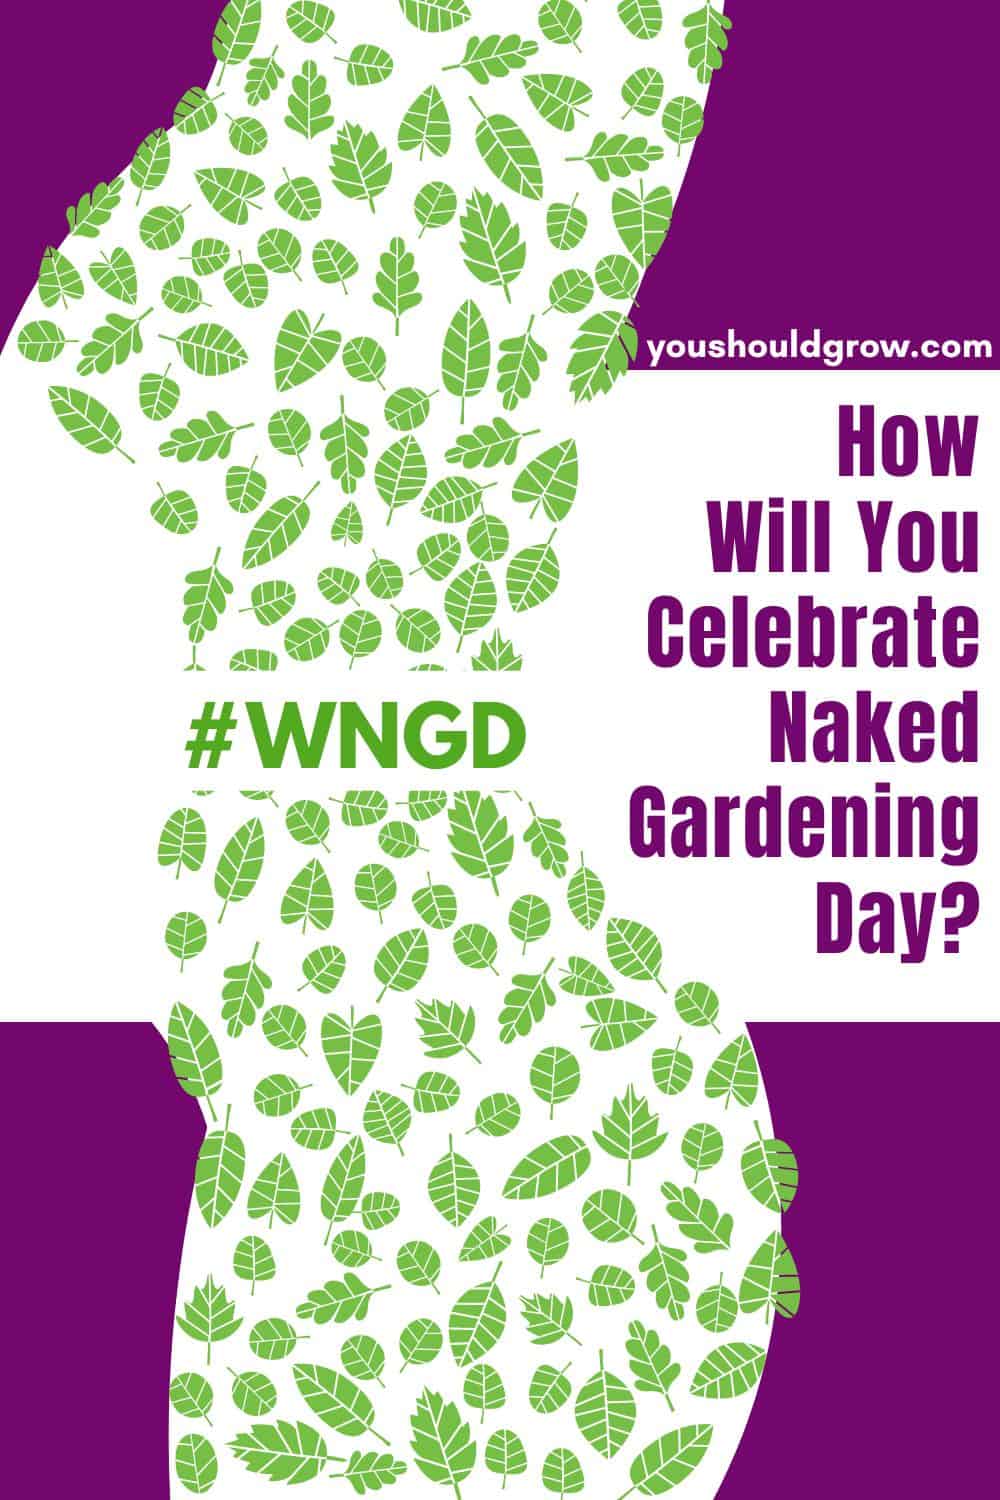 Gardening ideas: how about naked gardening? Have you thought about participating in world naked gardening day? Here are the best (AND WORST) ways people have celebrated #WNGD.